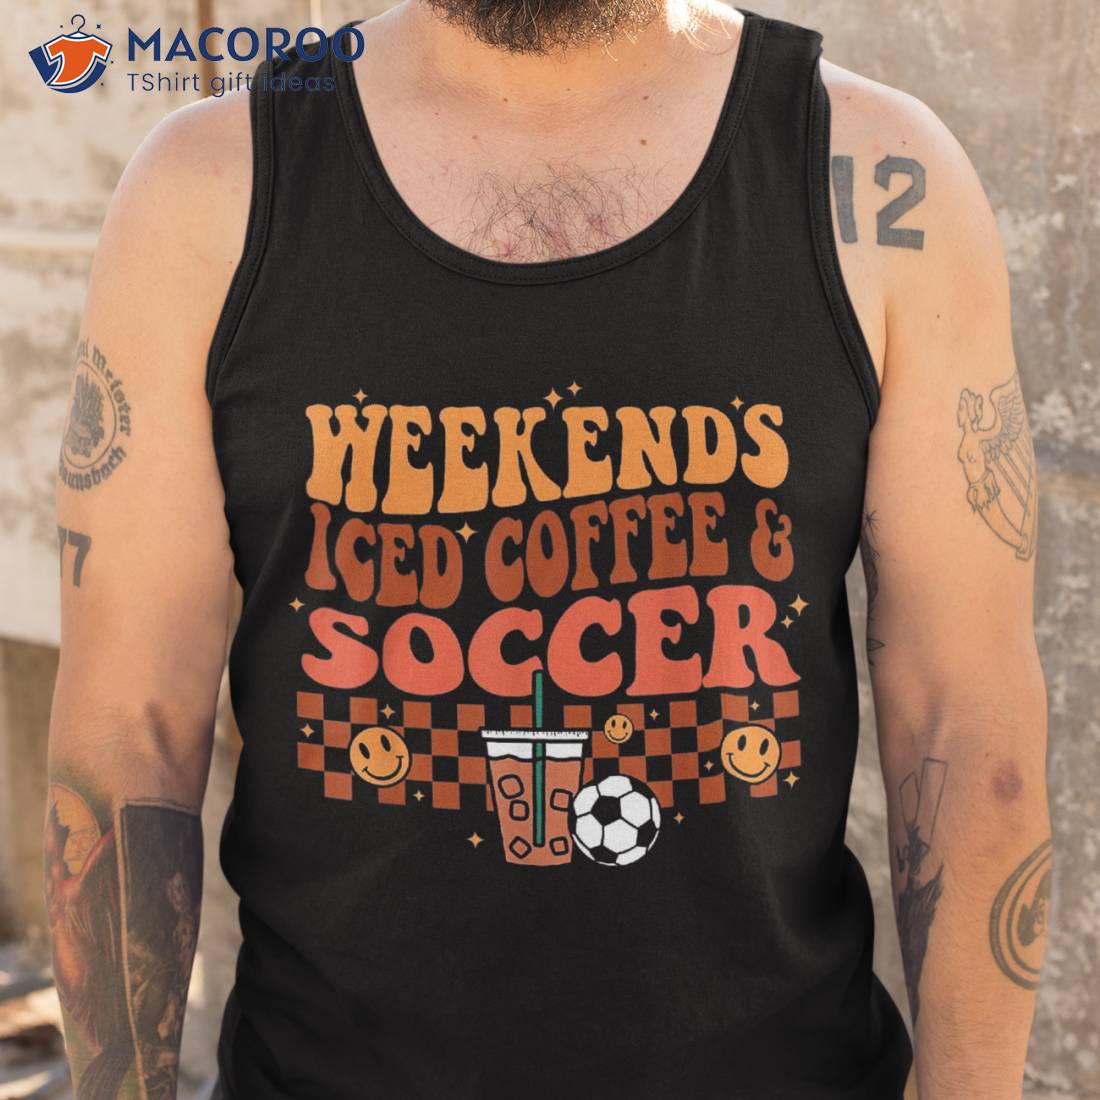 https://images.macoroo.com/wp-content/uploads/2023/05/weekends-iced-coffee-soccer-retro-groovy-vintage-girls-shirt-tank-top.jpg